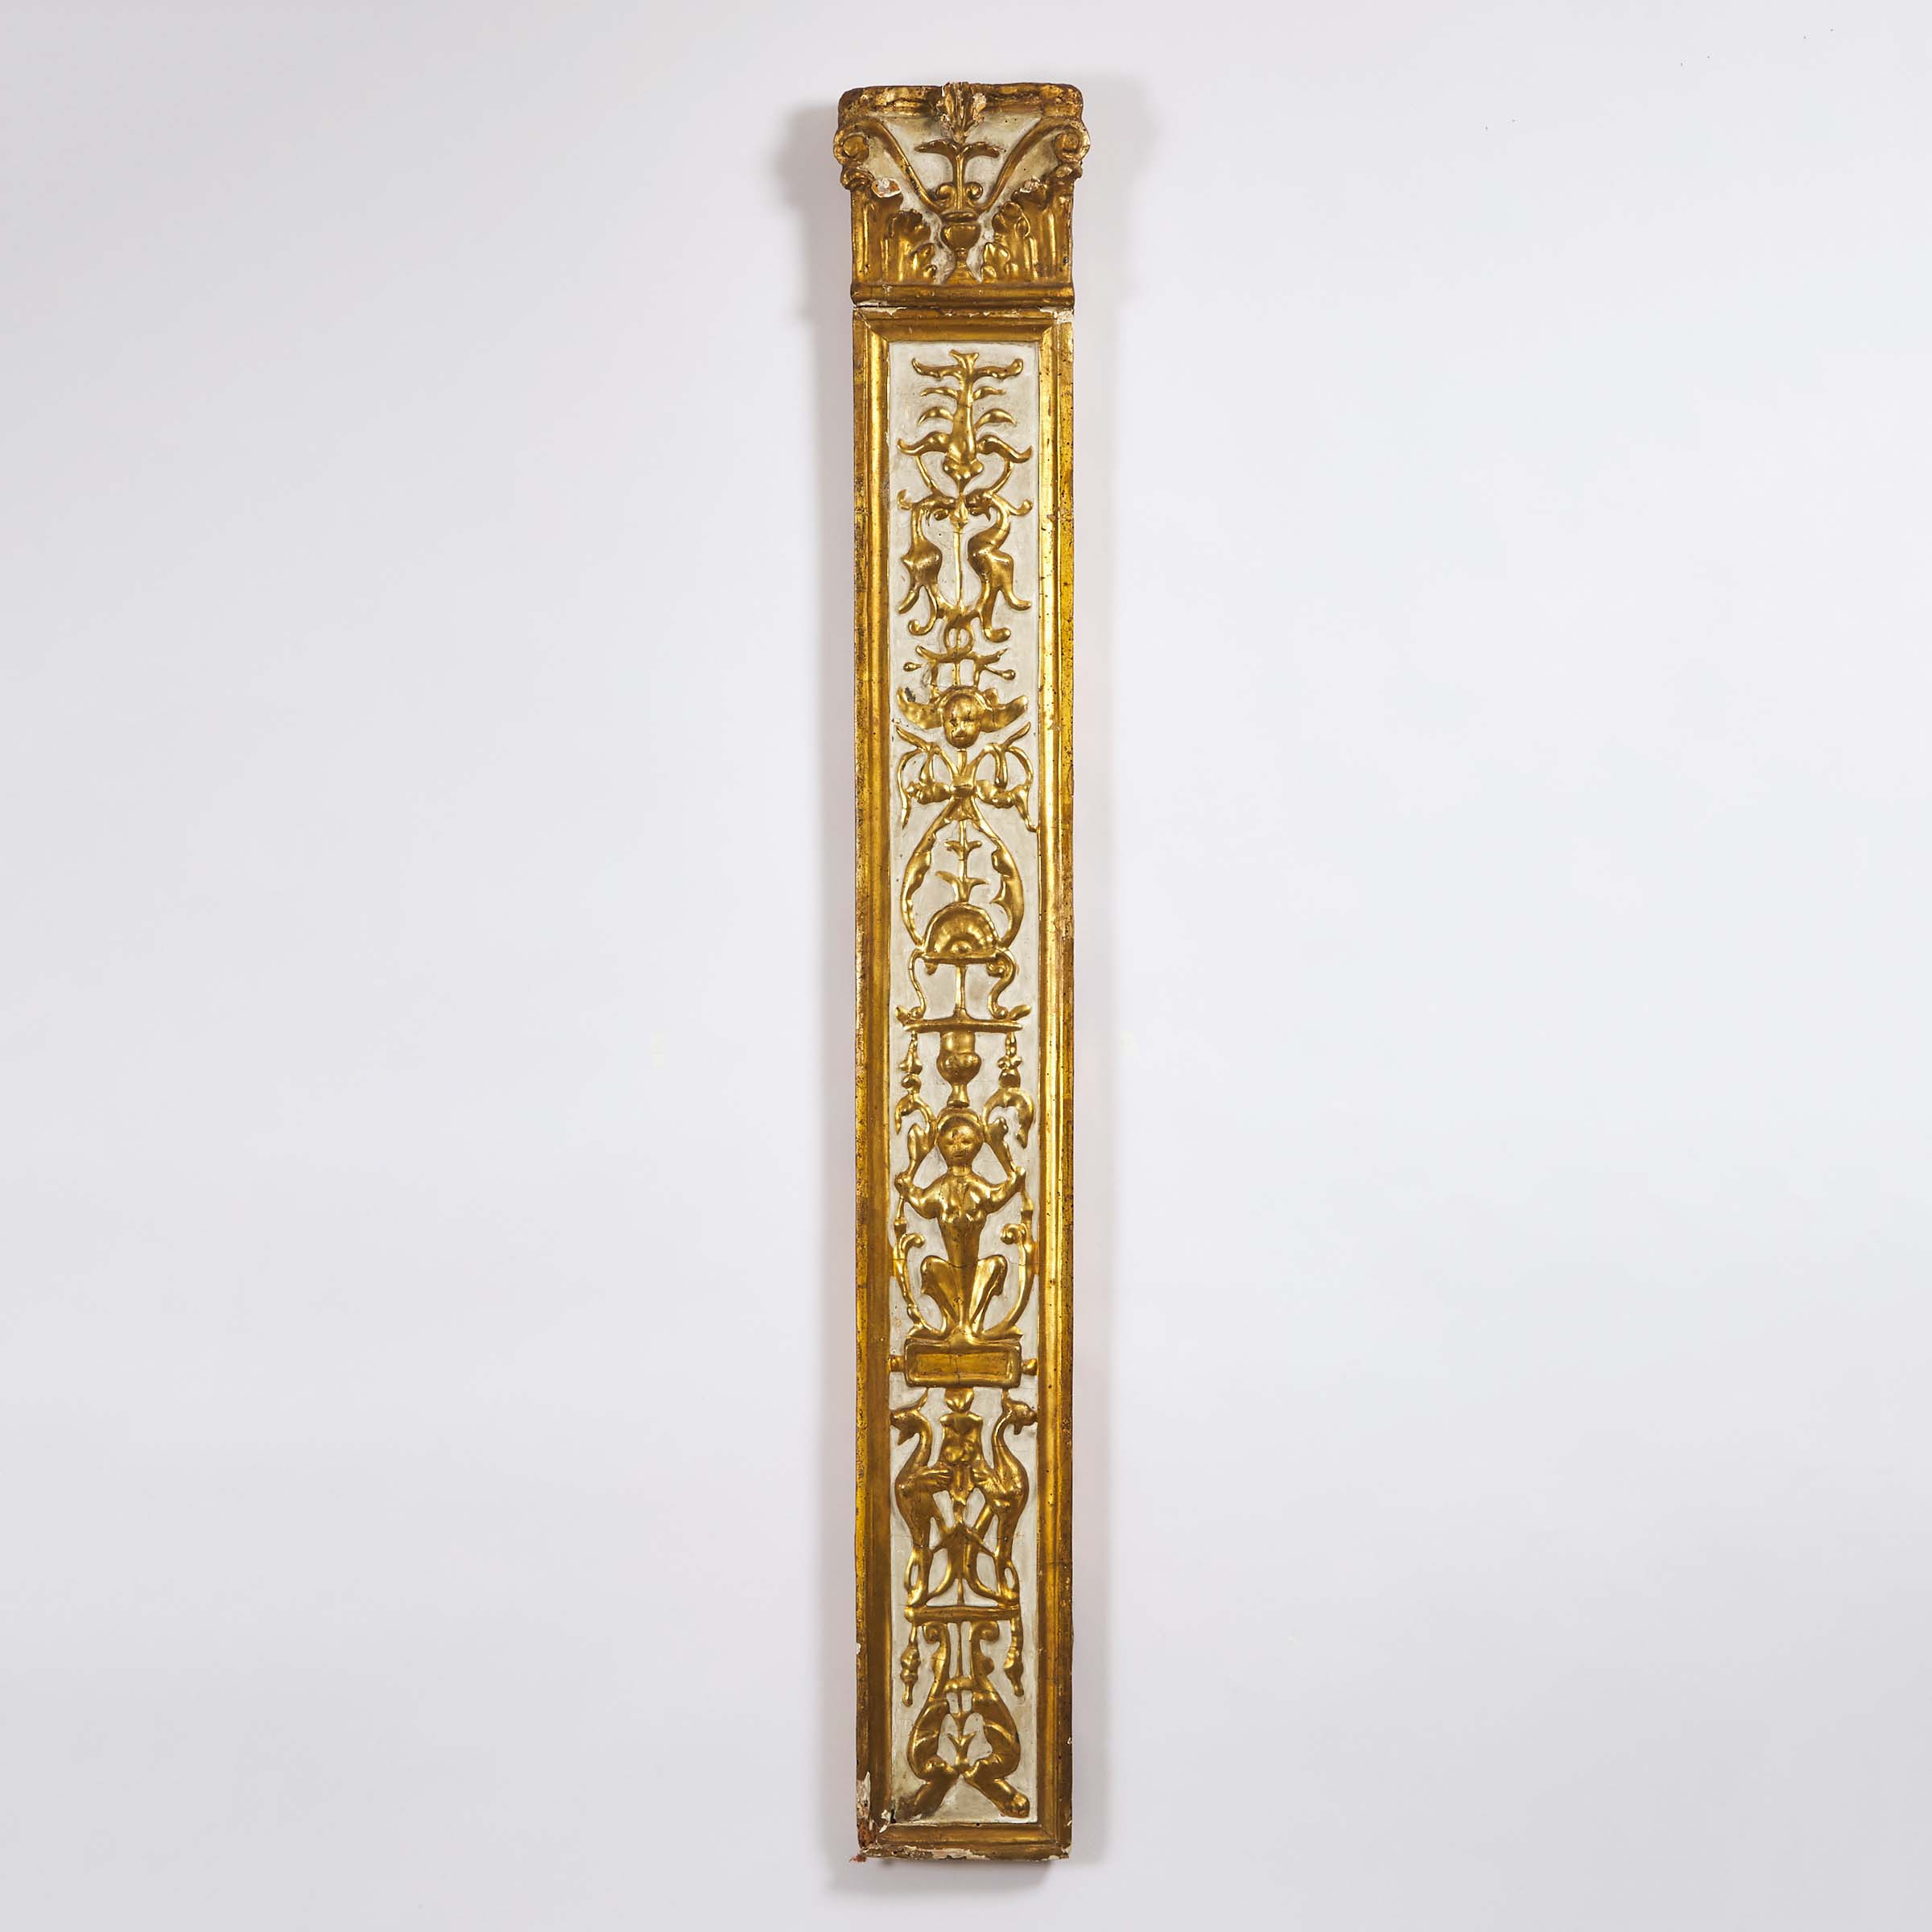 French Neoclassical Parcel Gilt Carved Pilaster, 18th century